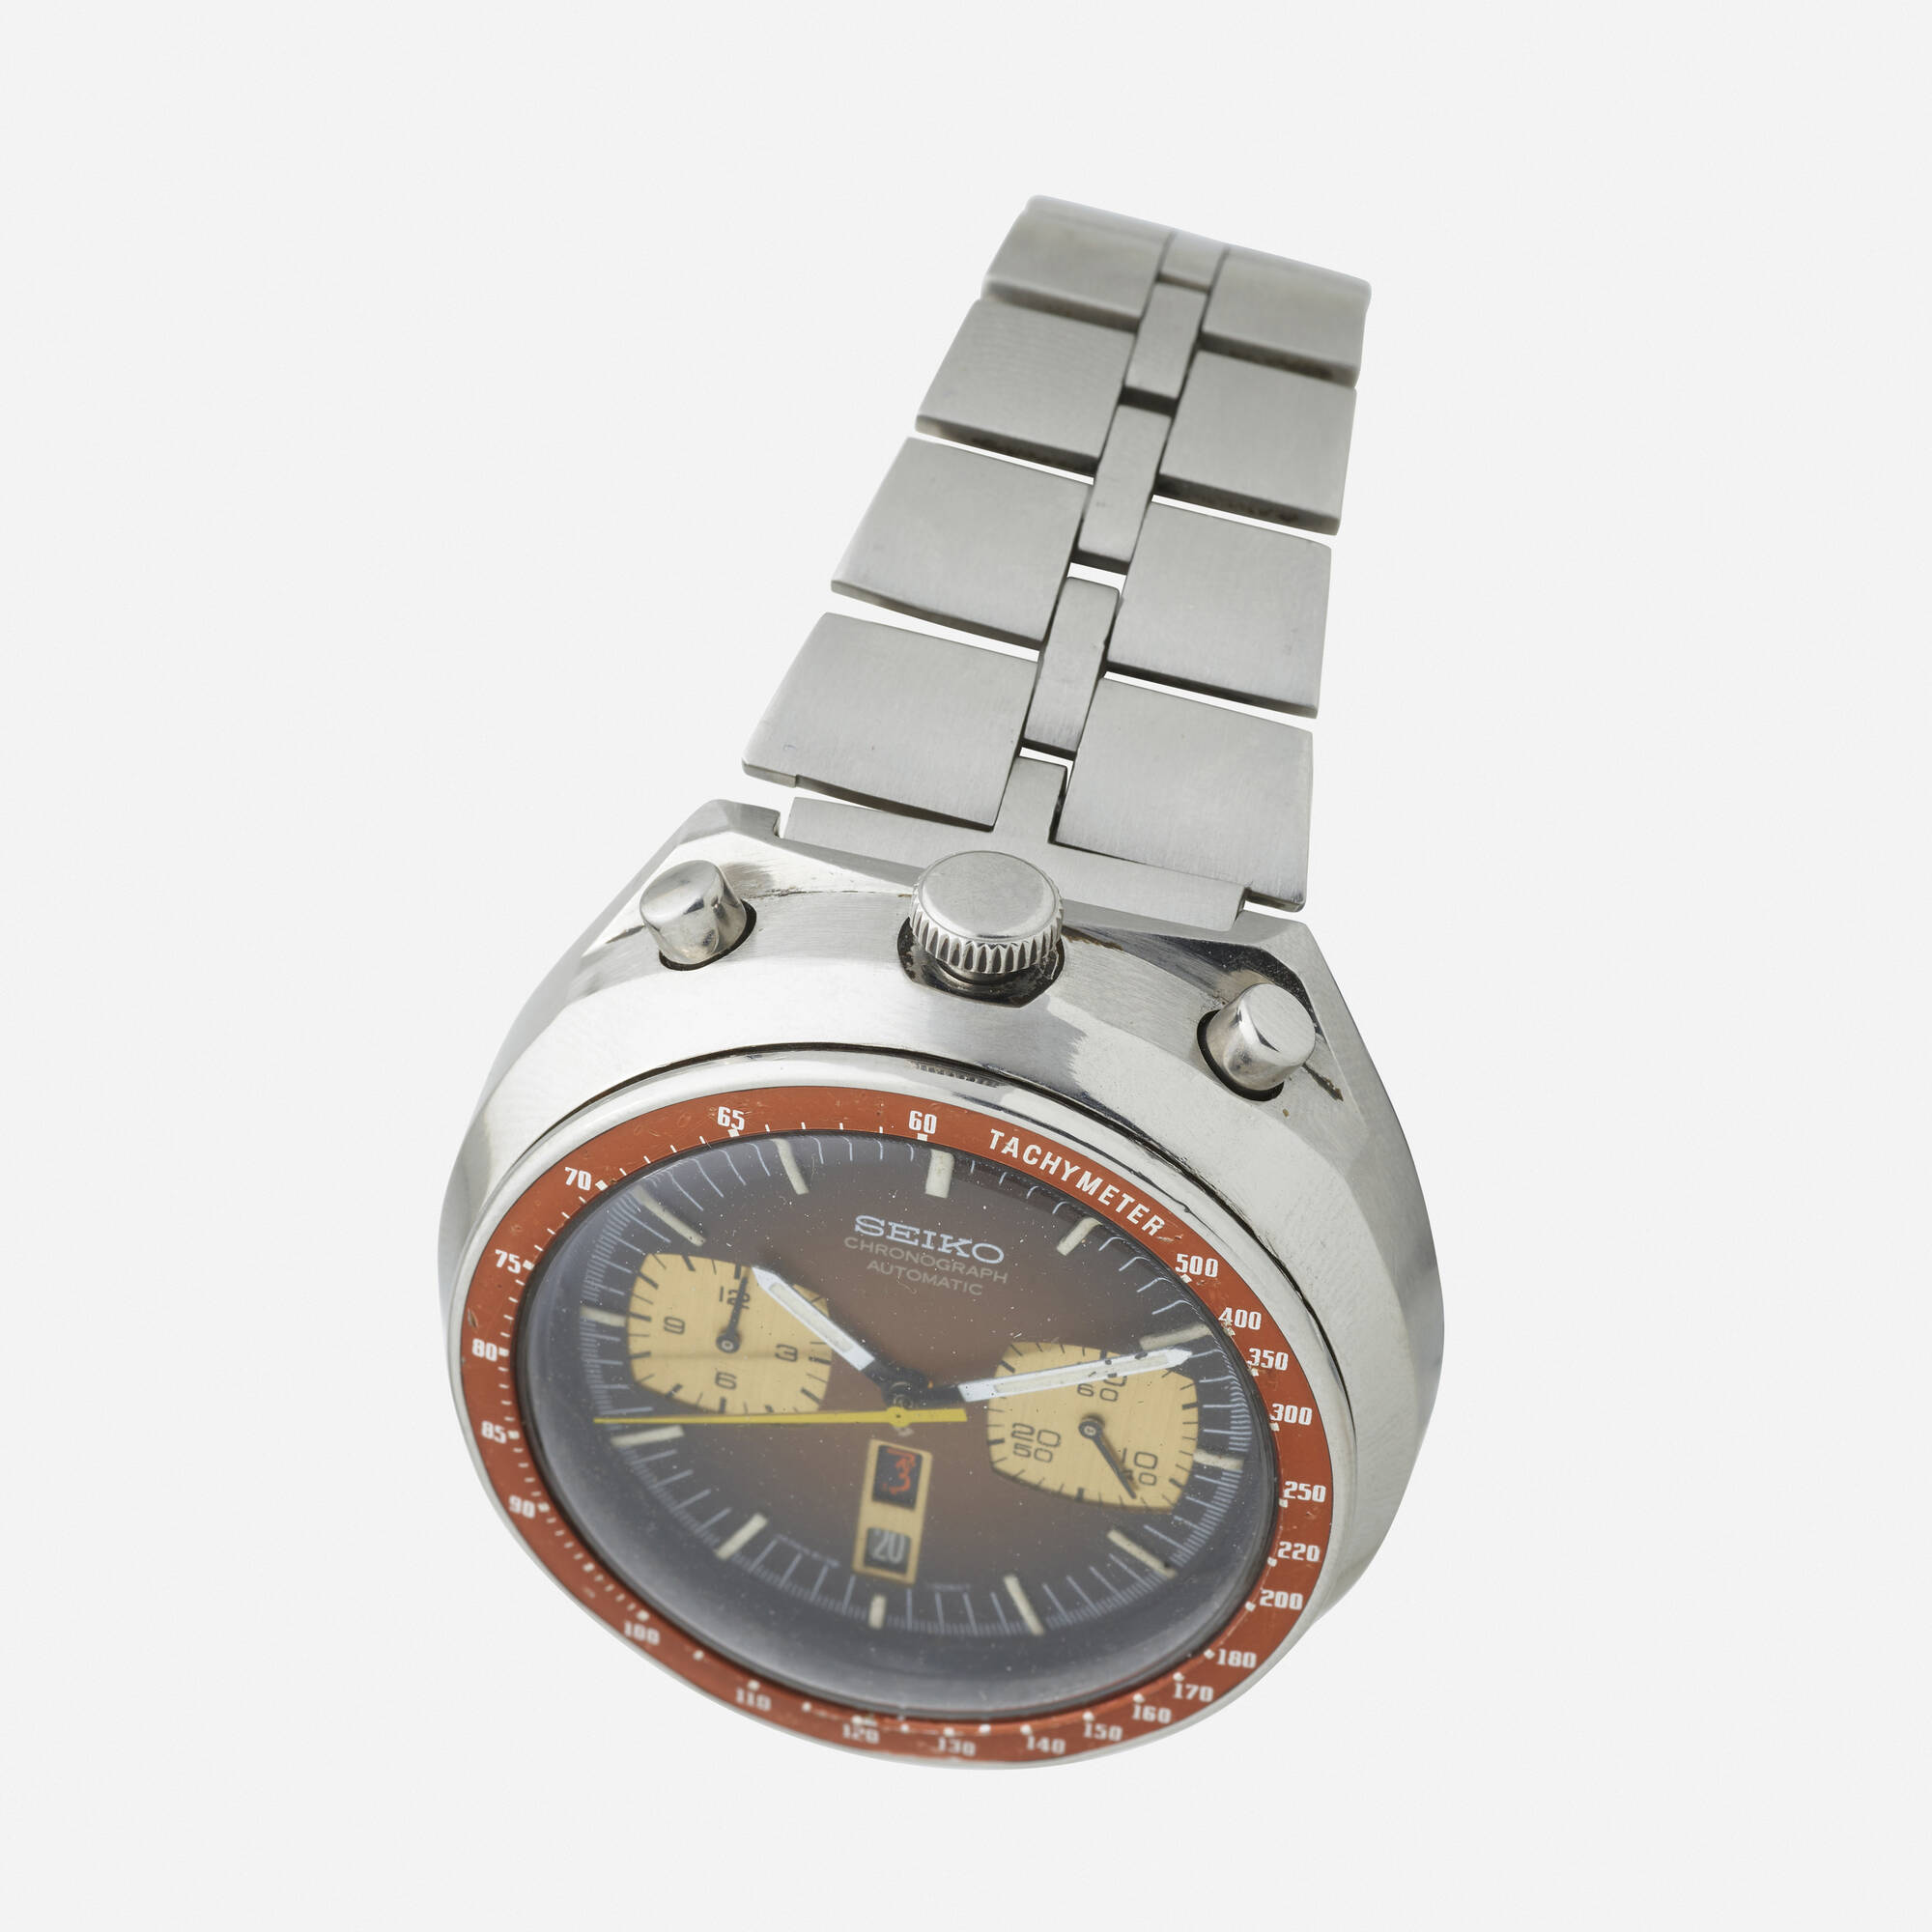 271: SEIKO, 'Bullhead' chronograph wristwatch, Ref. 6138-0060T < Important  Design, 10 June 2021 < Auctions | Wright: Auctions of Art and Design